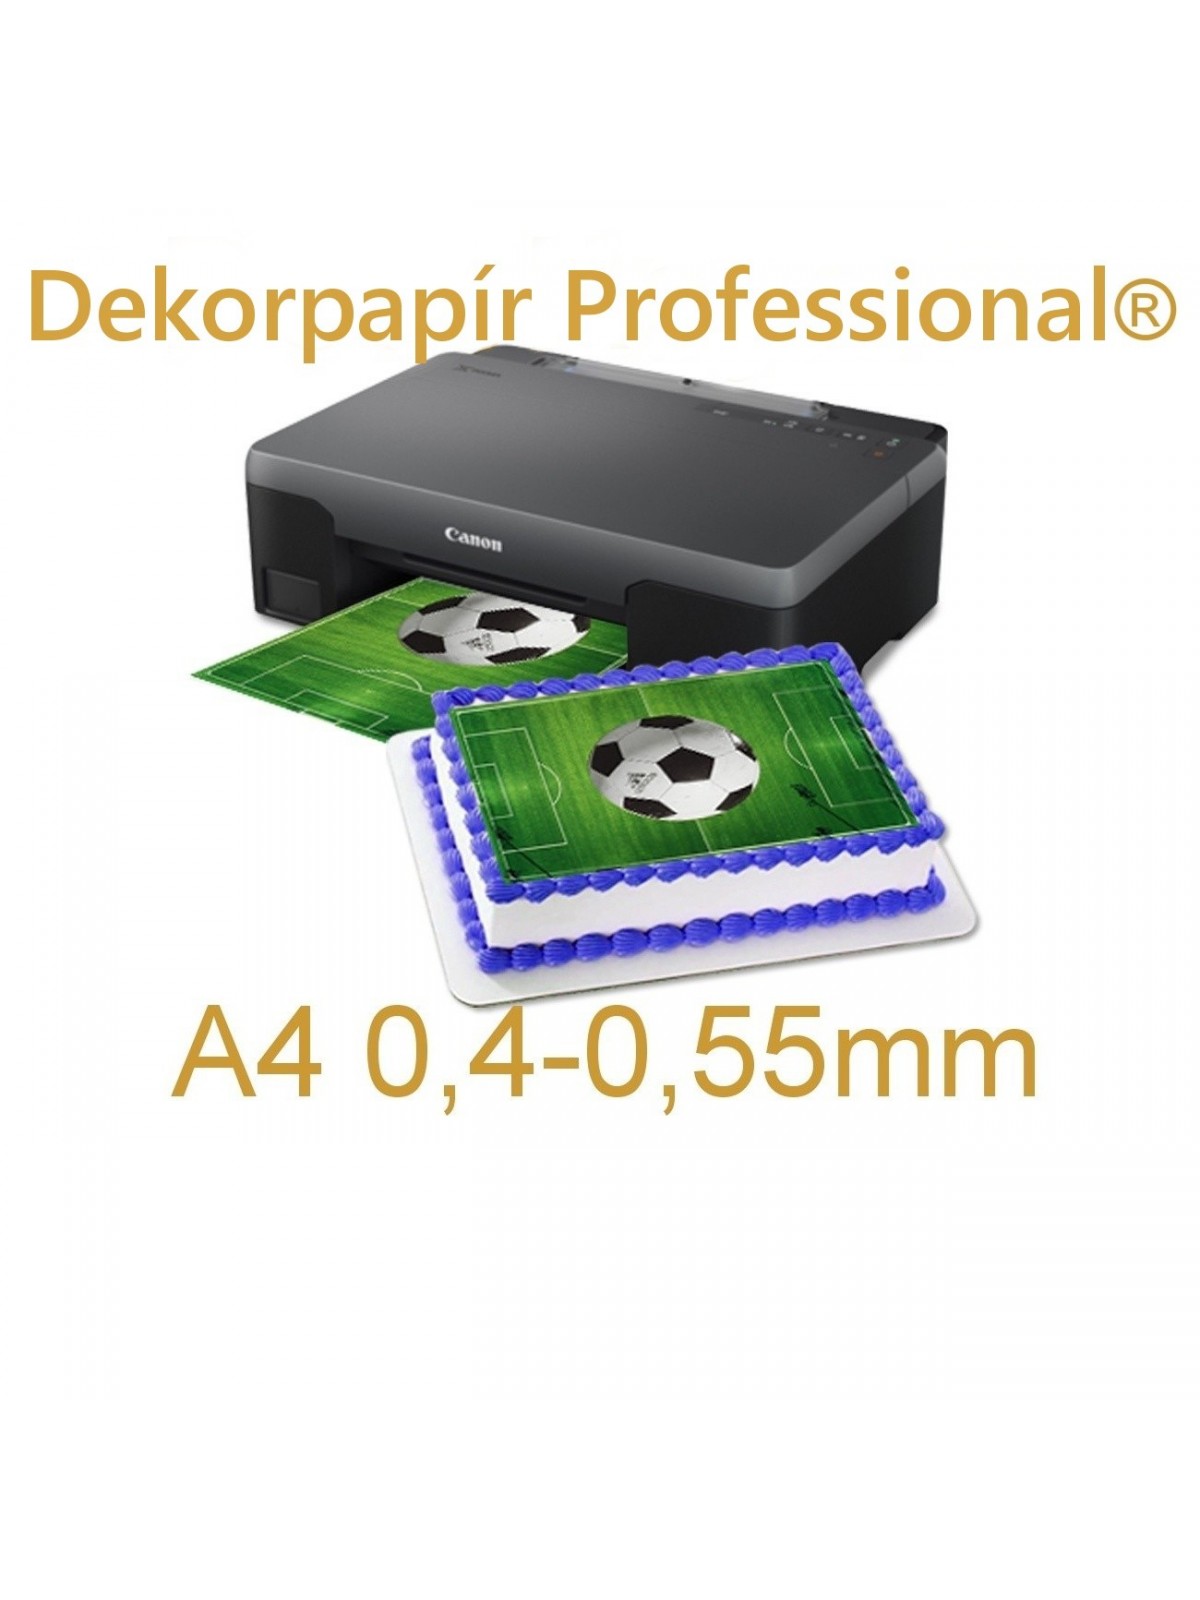 Decorpaper Profesional® A4 0.4-0.55mm